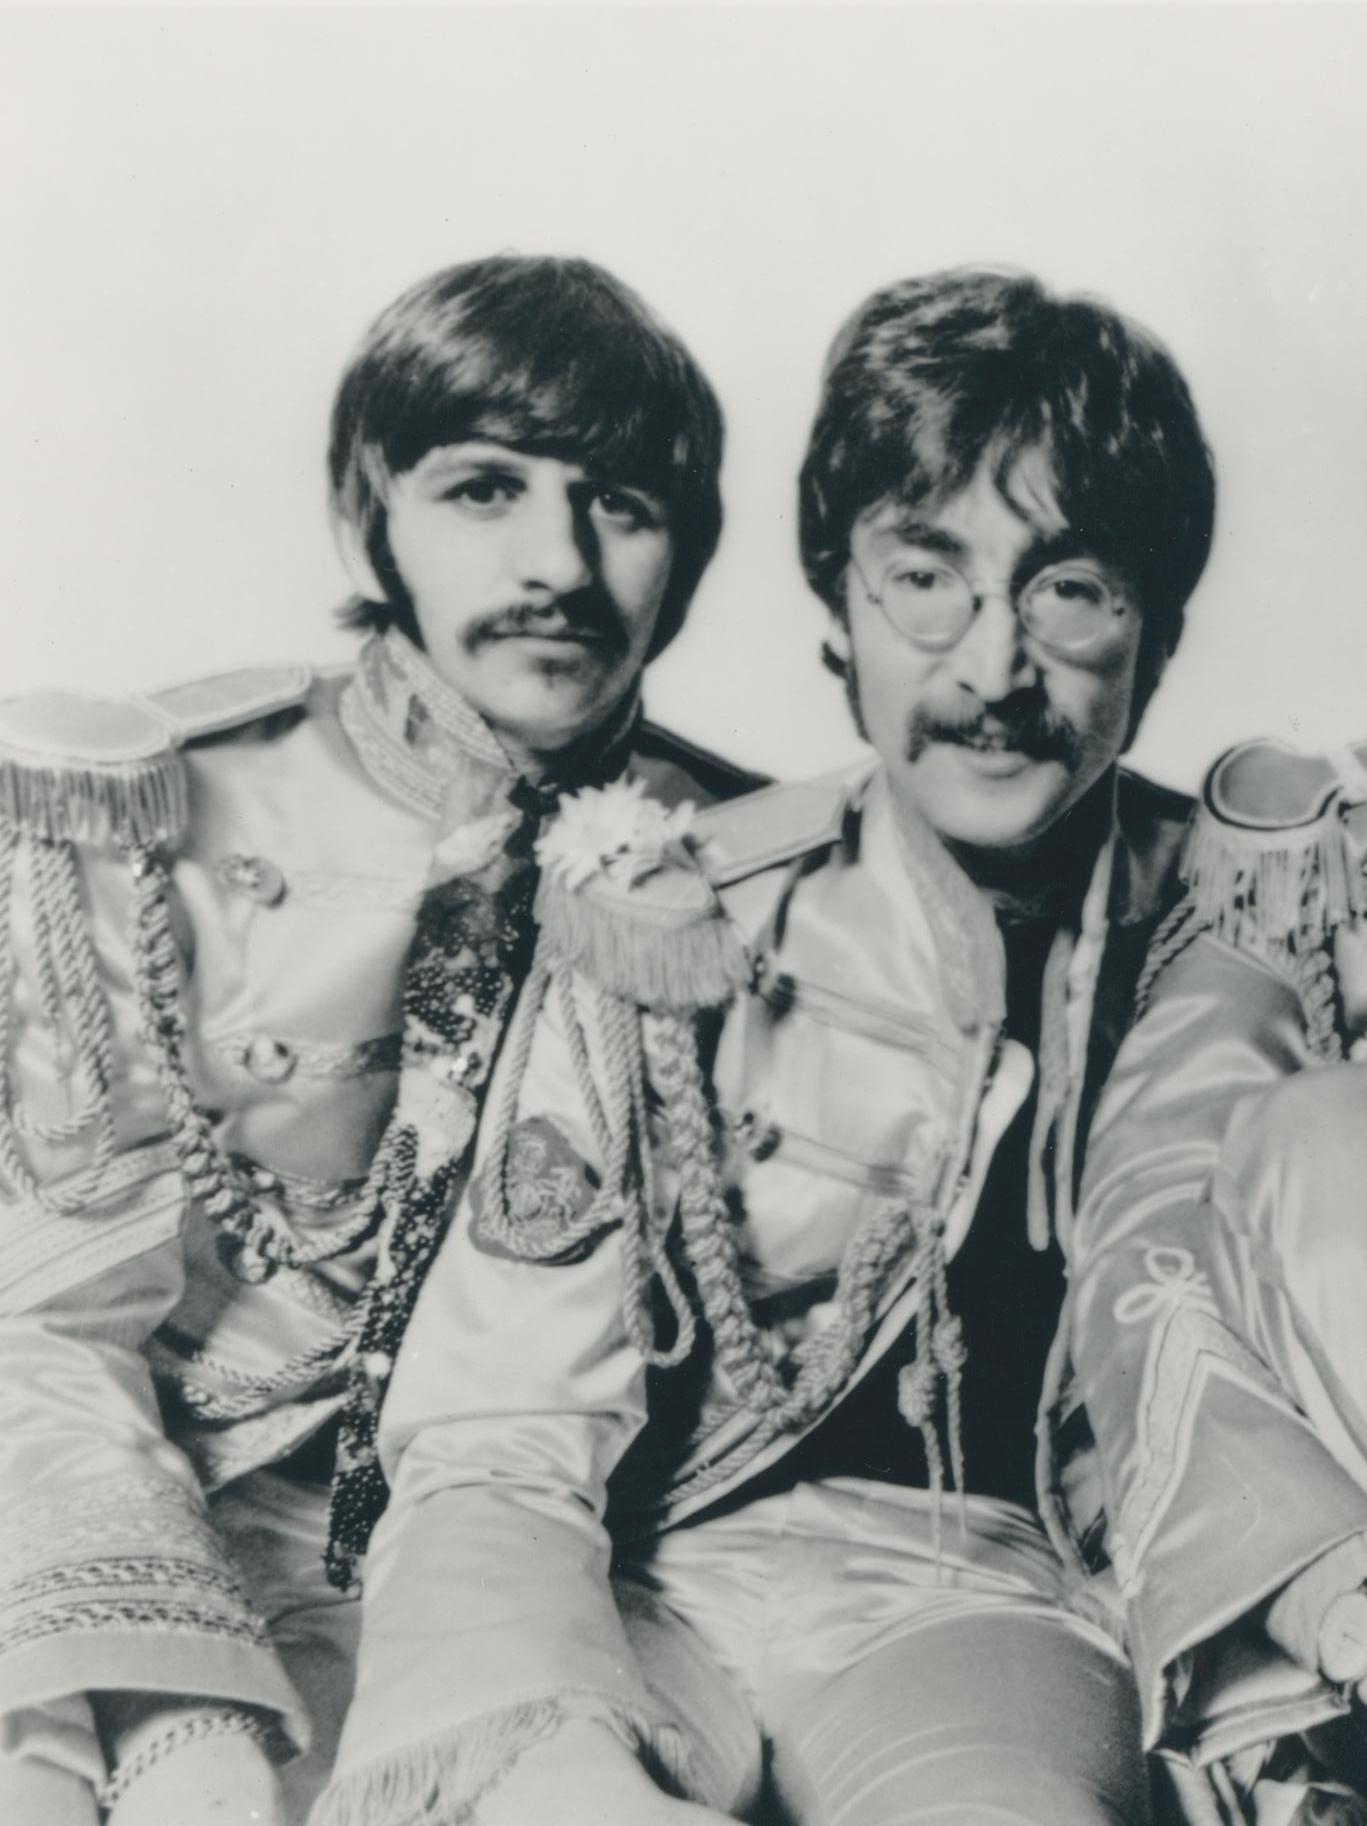 The Beatles were an English rock band formed in Liverpool in 1960. With a line-up comprising John Lennon, Paul McCartney, George Harrison and Ringo Starr, they are regarded as the most influential band of all time. (wikipedia)

This silver gelatine